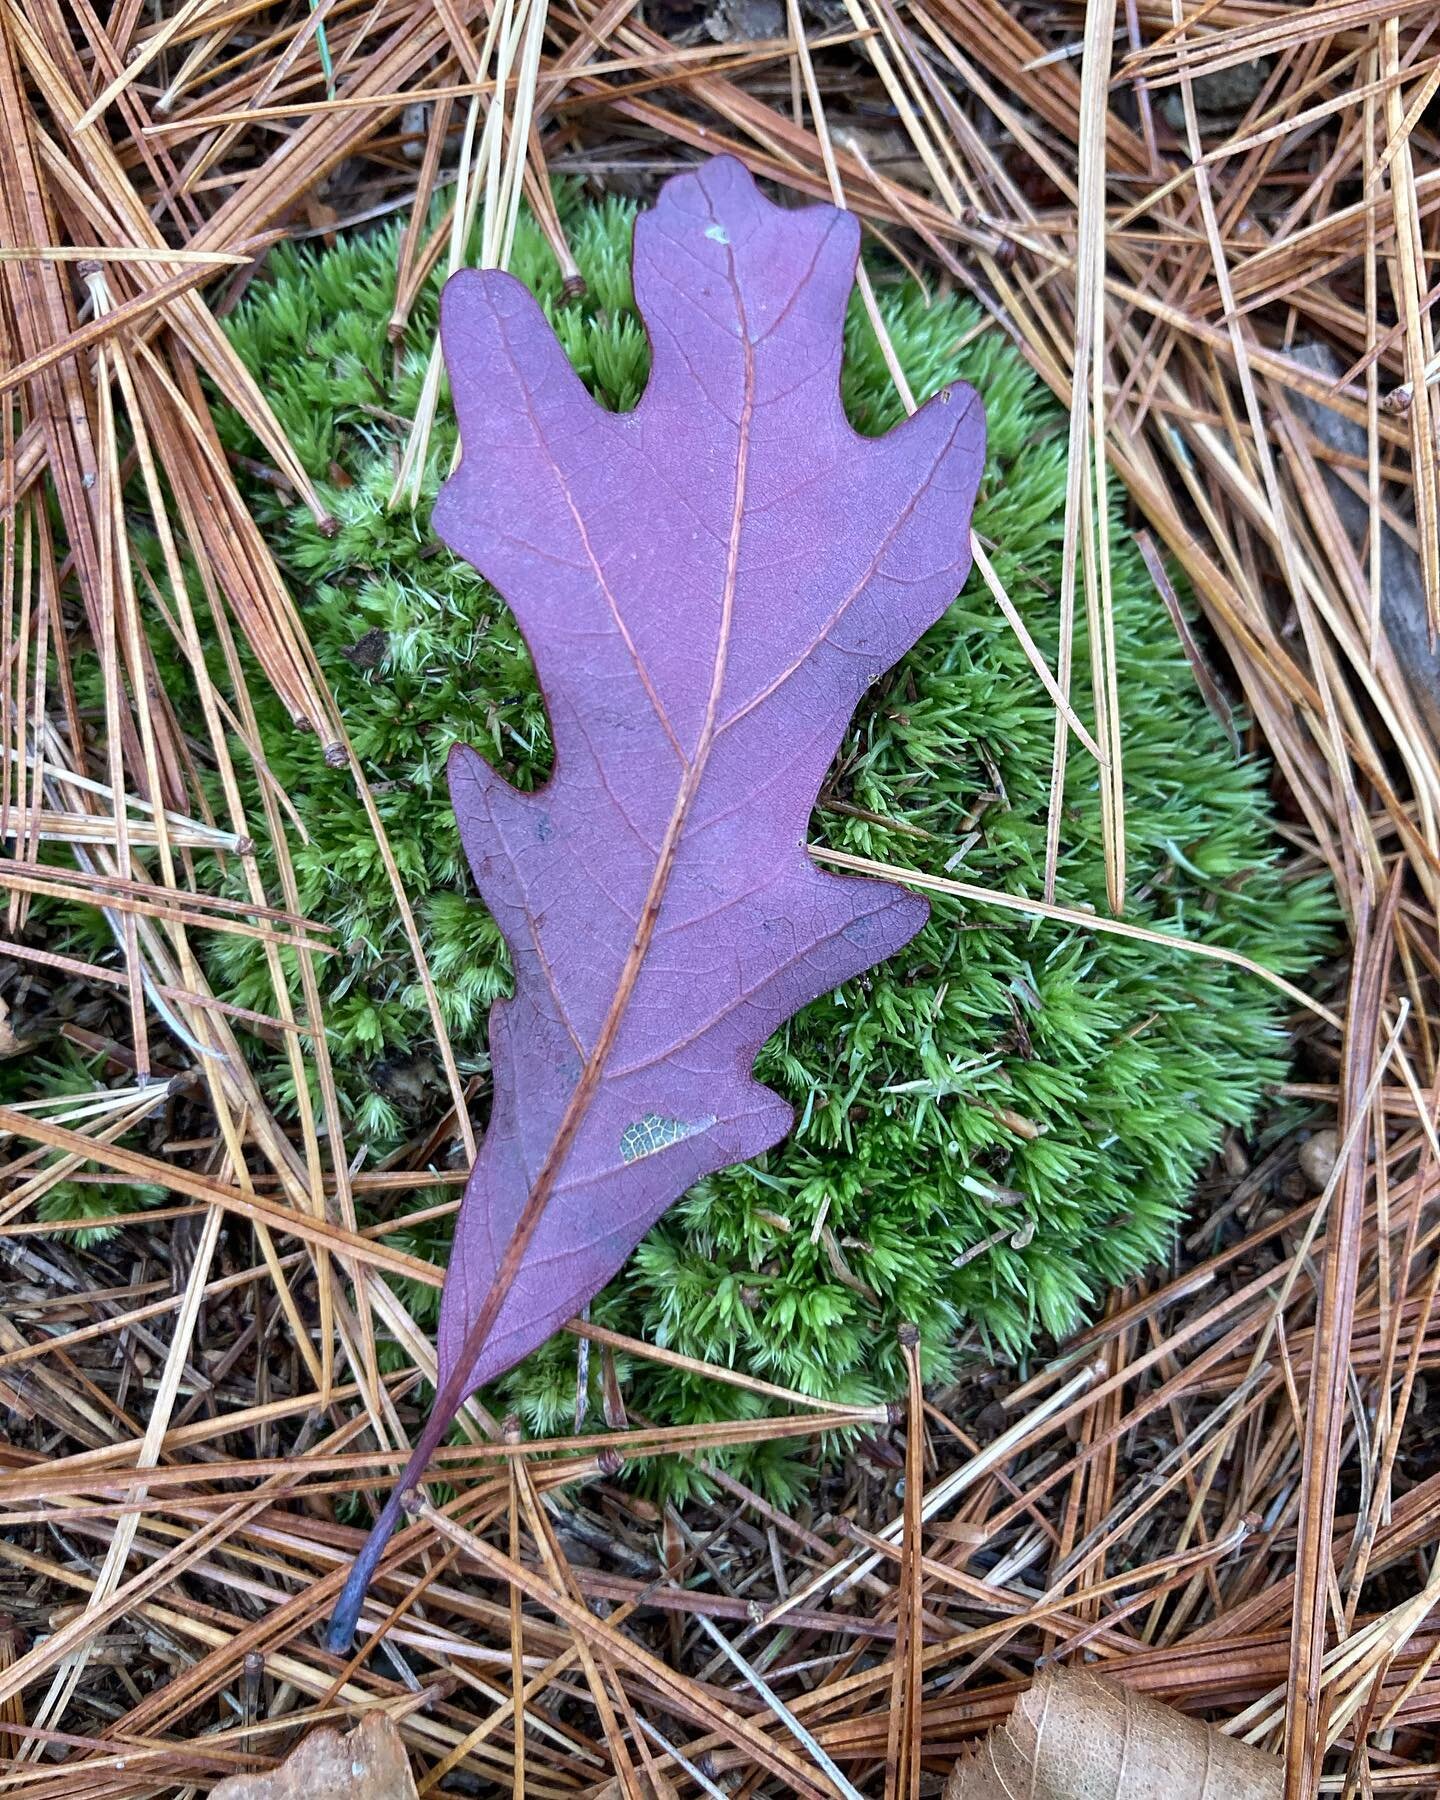 Found Color | Strikingly purple Red Oak leaf in an overcast afternoon light